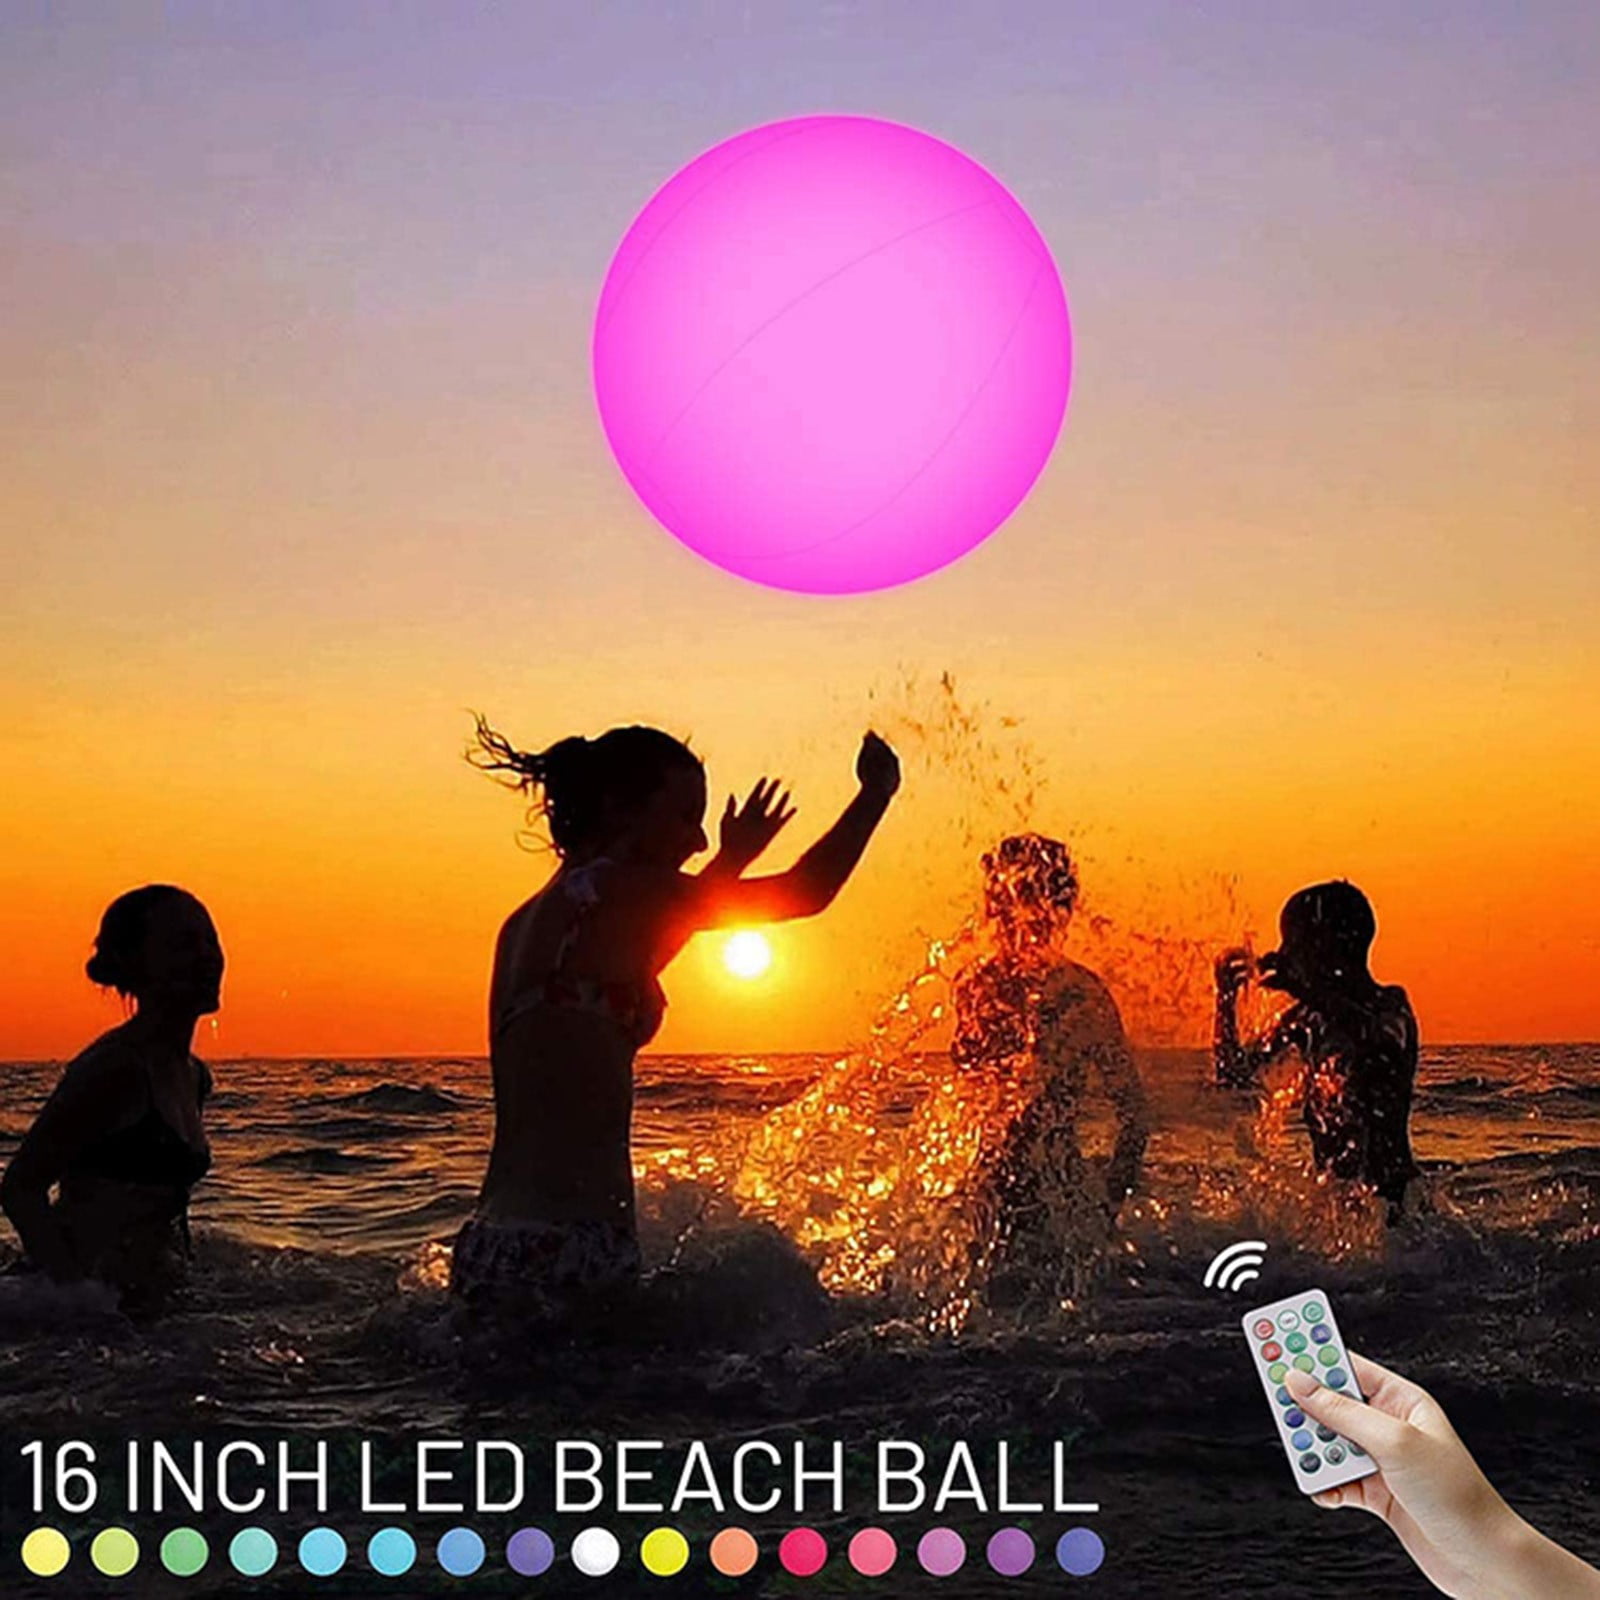 Inflatable Pool Floats Ball 16'' LED Beach Ball Glowing PVC Ball for Swimming 